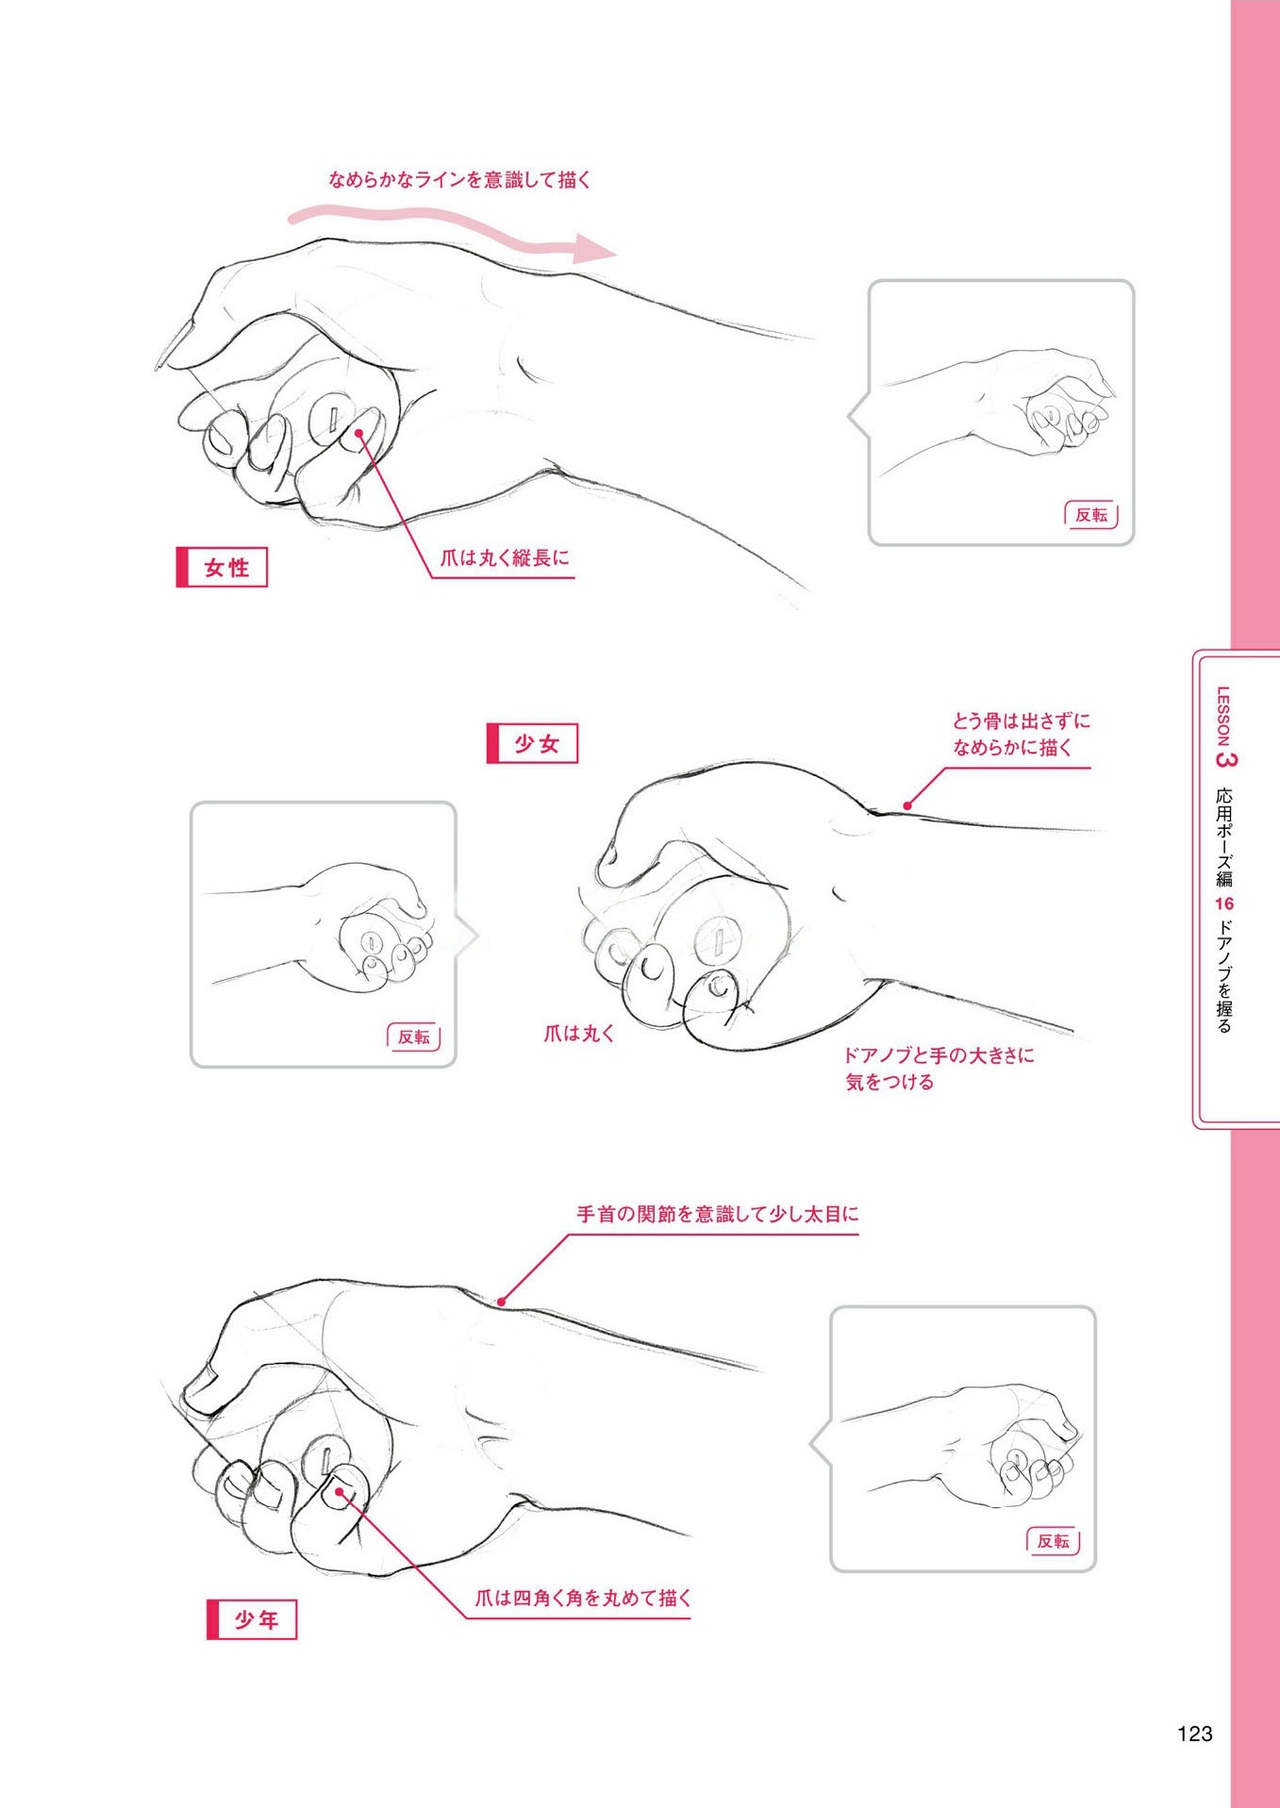 How to draw hands 123